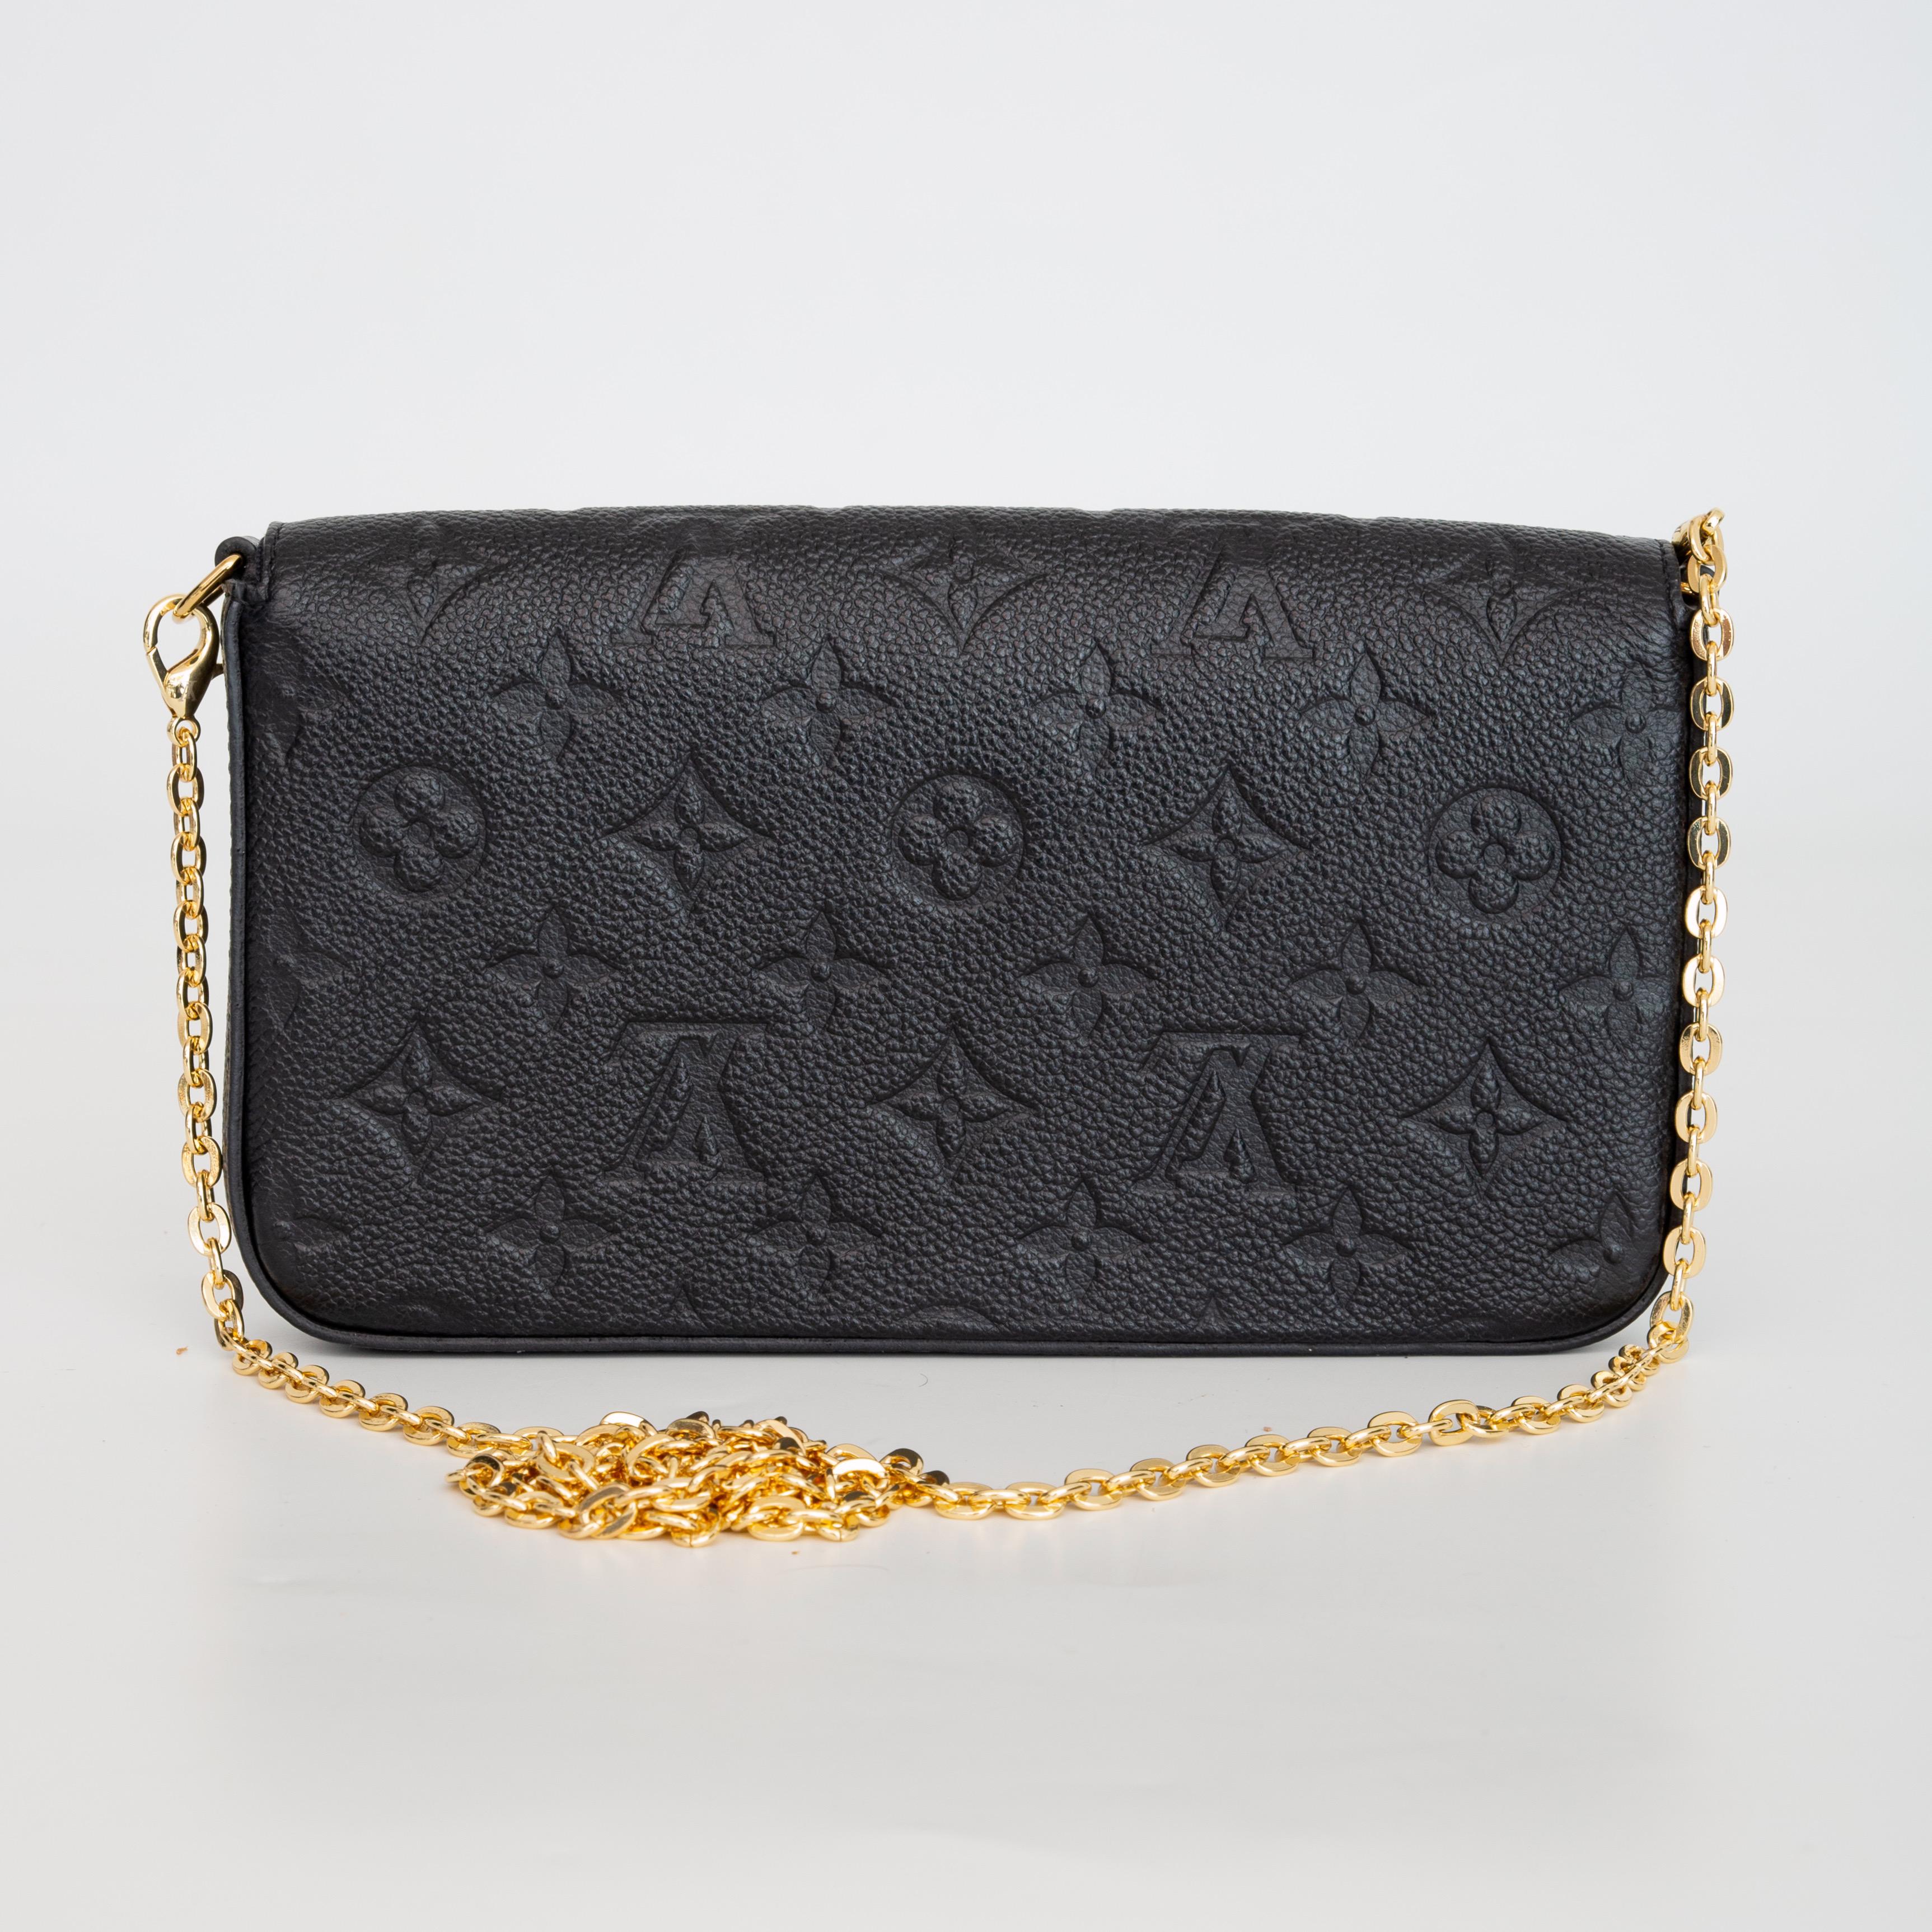 This Pochette Félicie is made from a supple grained cowhide called Empreinte leather with Louis Vuitton's signature monogram pattern embossed. The bag features textile lining, gold tone hardware, press stud closure on front flap and an interior flat